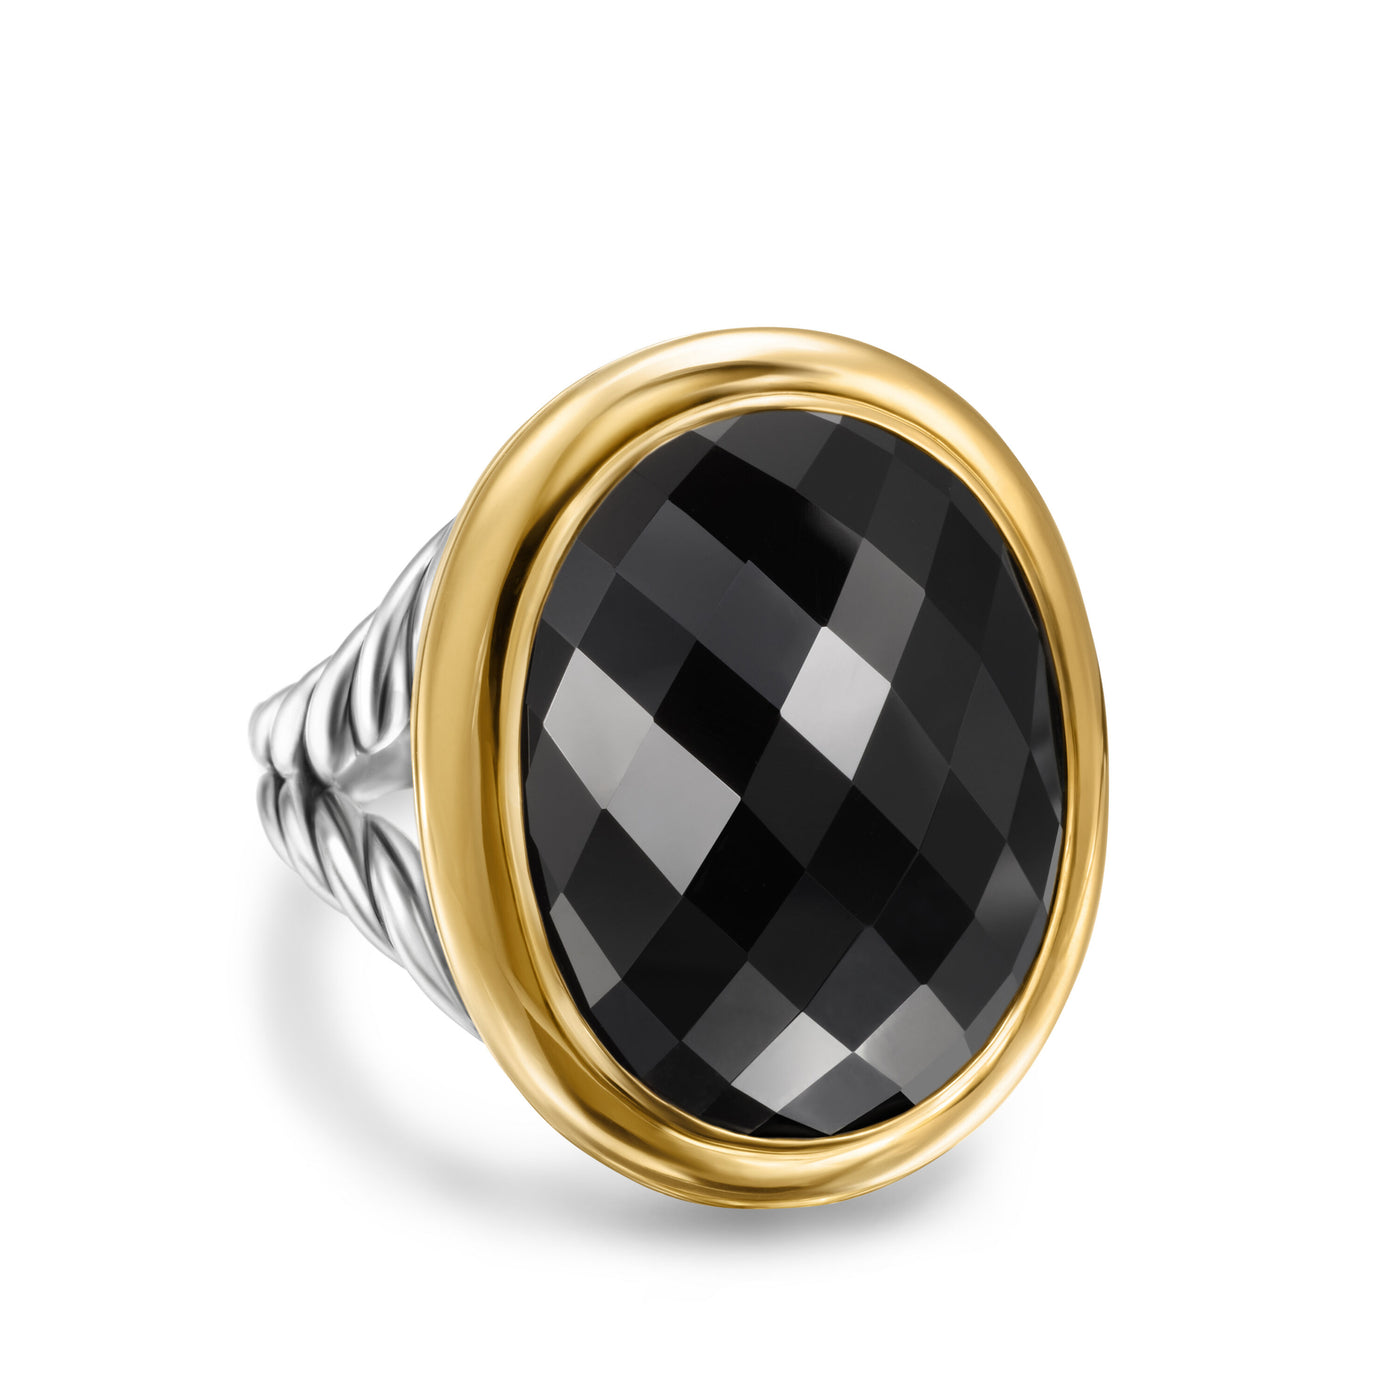 Albion® Oval Ring in Sterling Silver with 18K Yellow Gold and Black Onyx\, 21mm